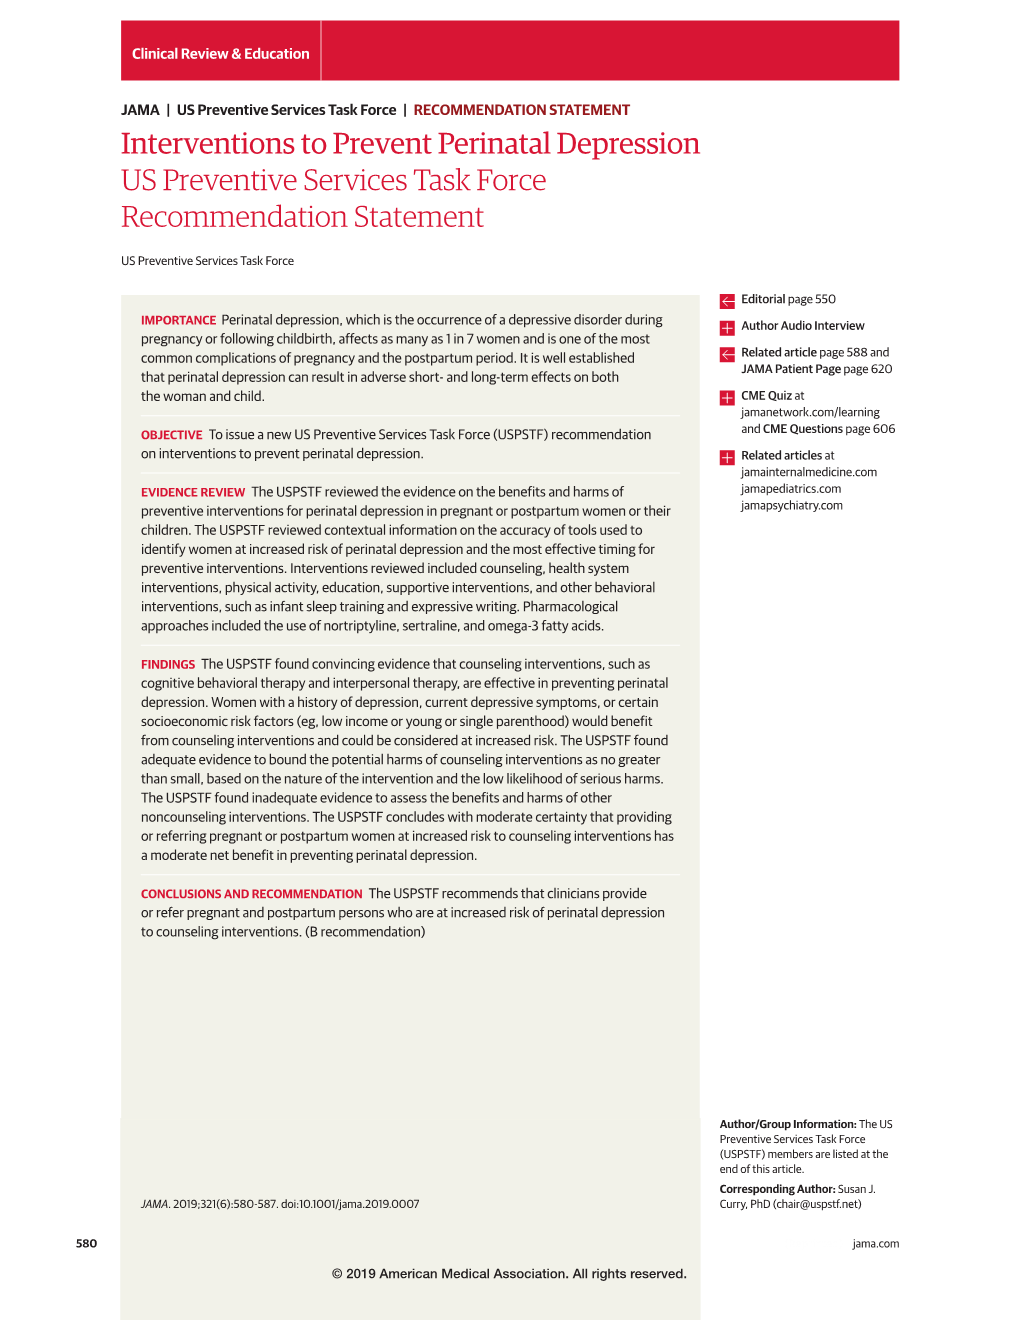 Interventions to Prevent Perinatal Depression US Preventive Services Task Force Recommendation Statement